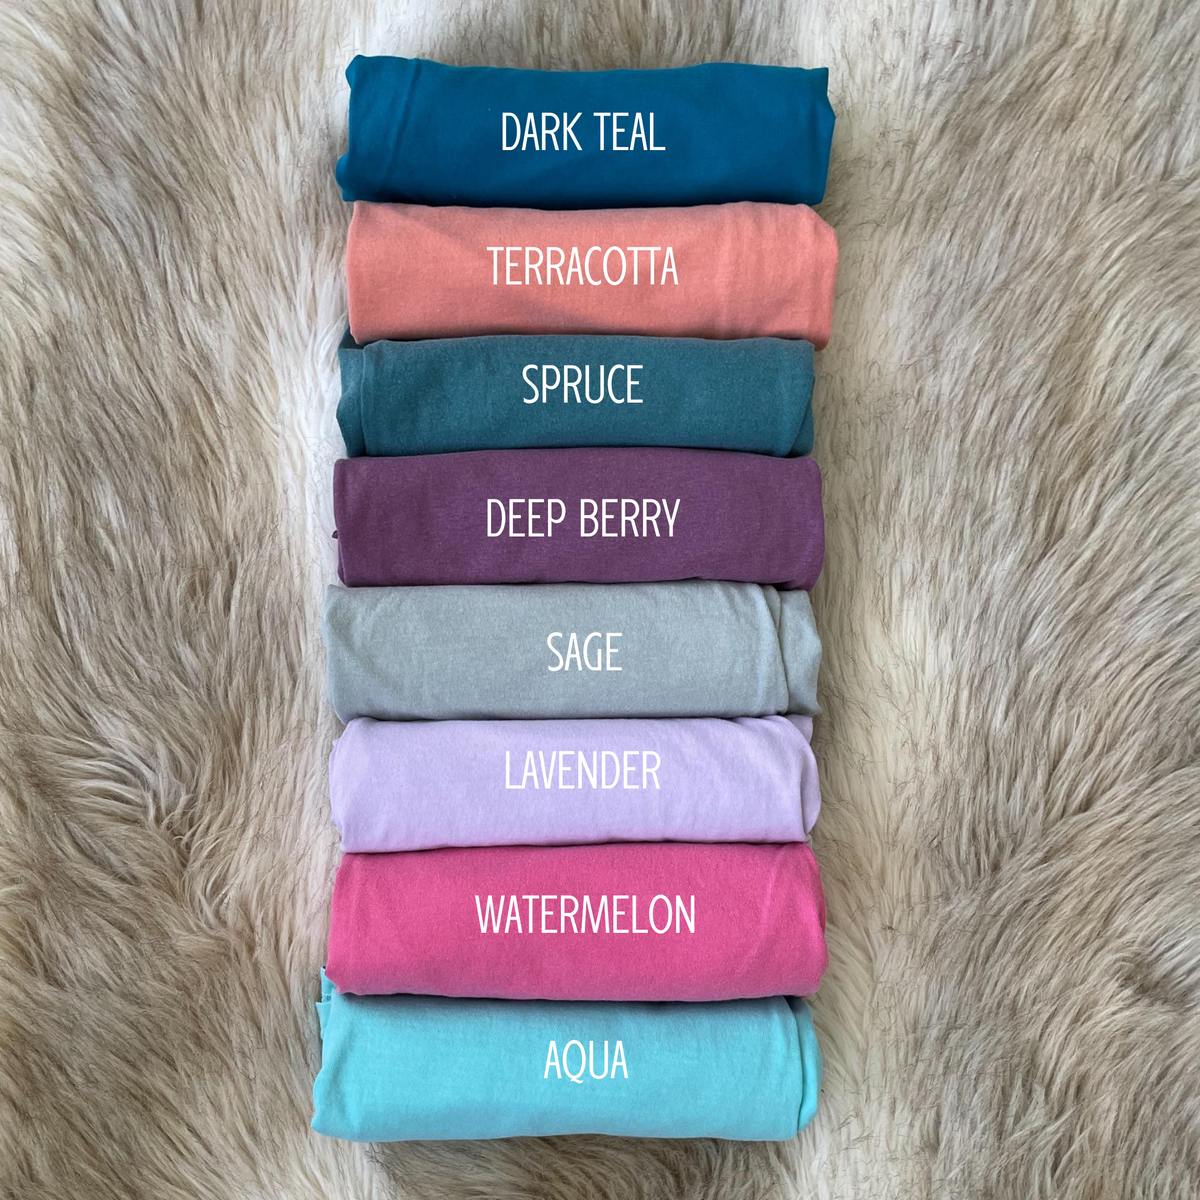 PREORDER: Mama Embroidered Collar Tee in Assorted Colors